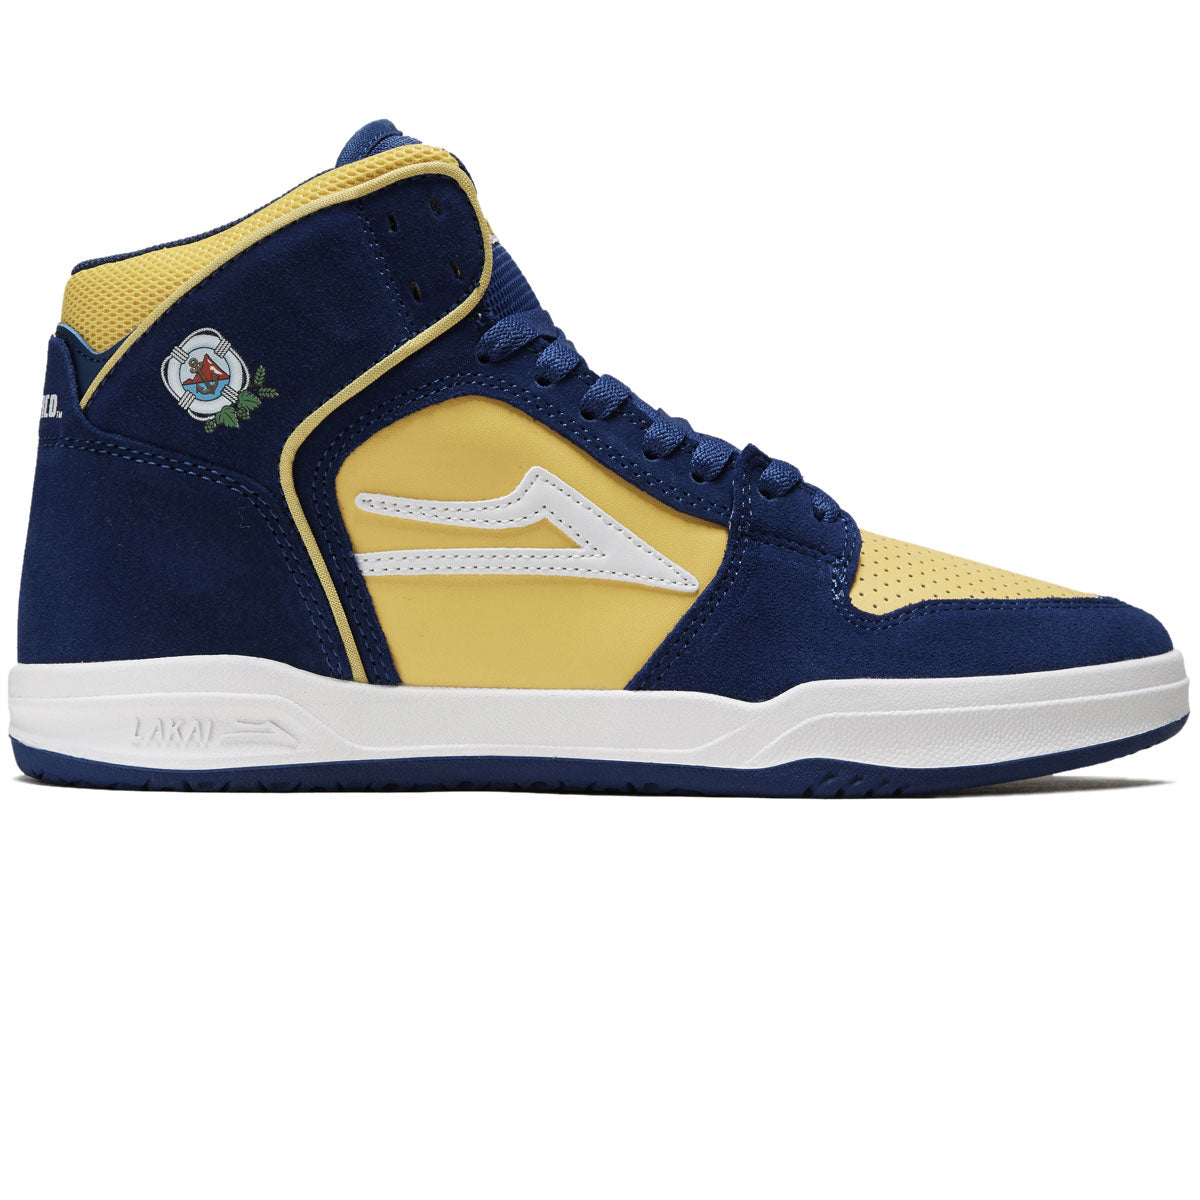 Lakai x Pacifico Telford Shoes - Blue/Yellow Suede image 1